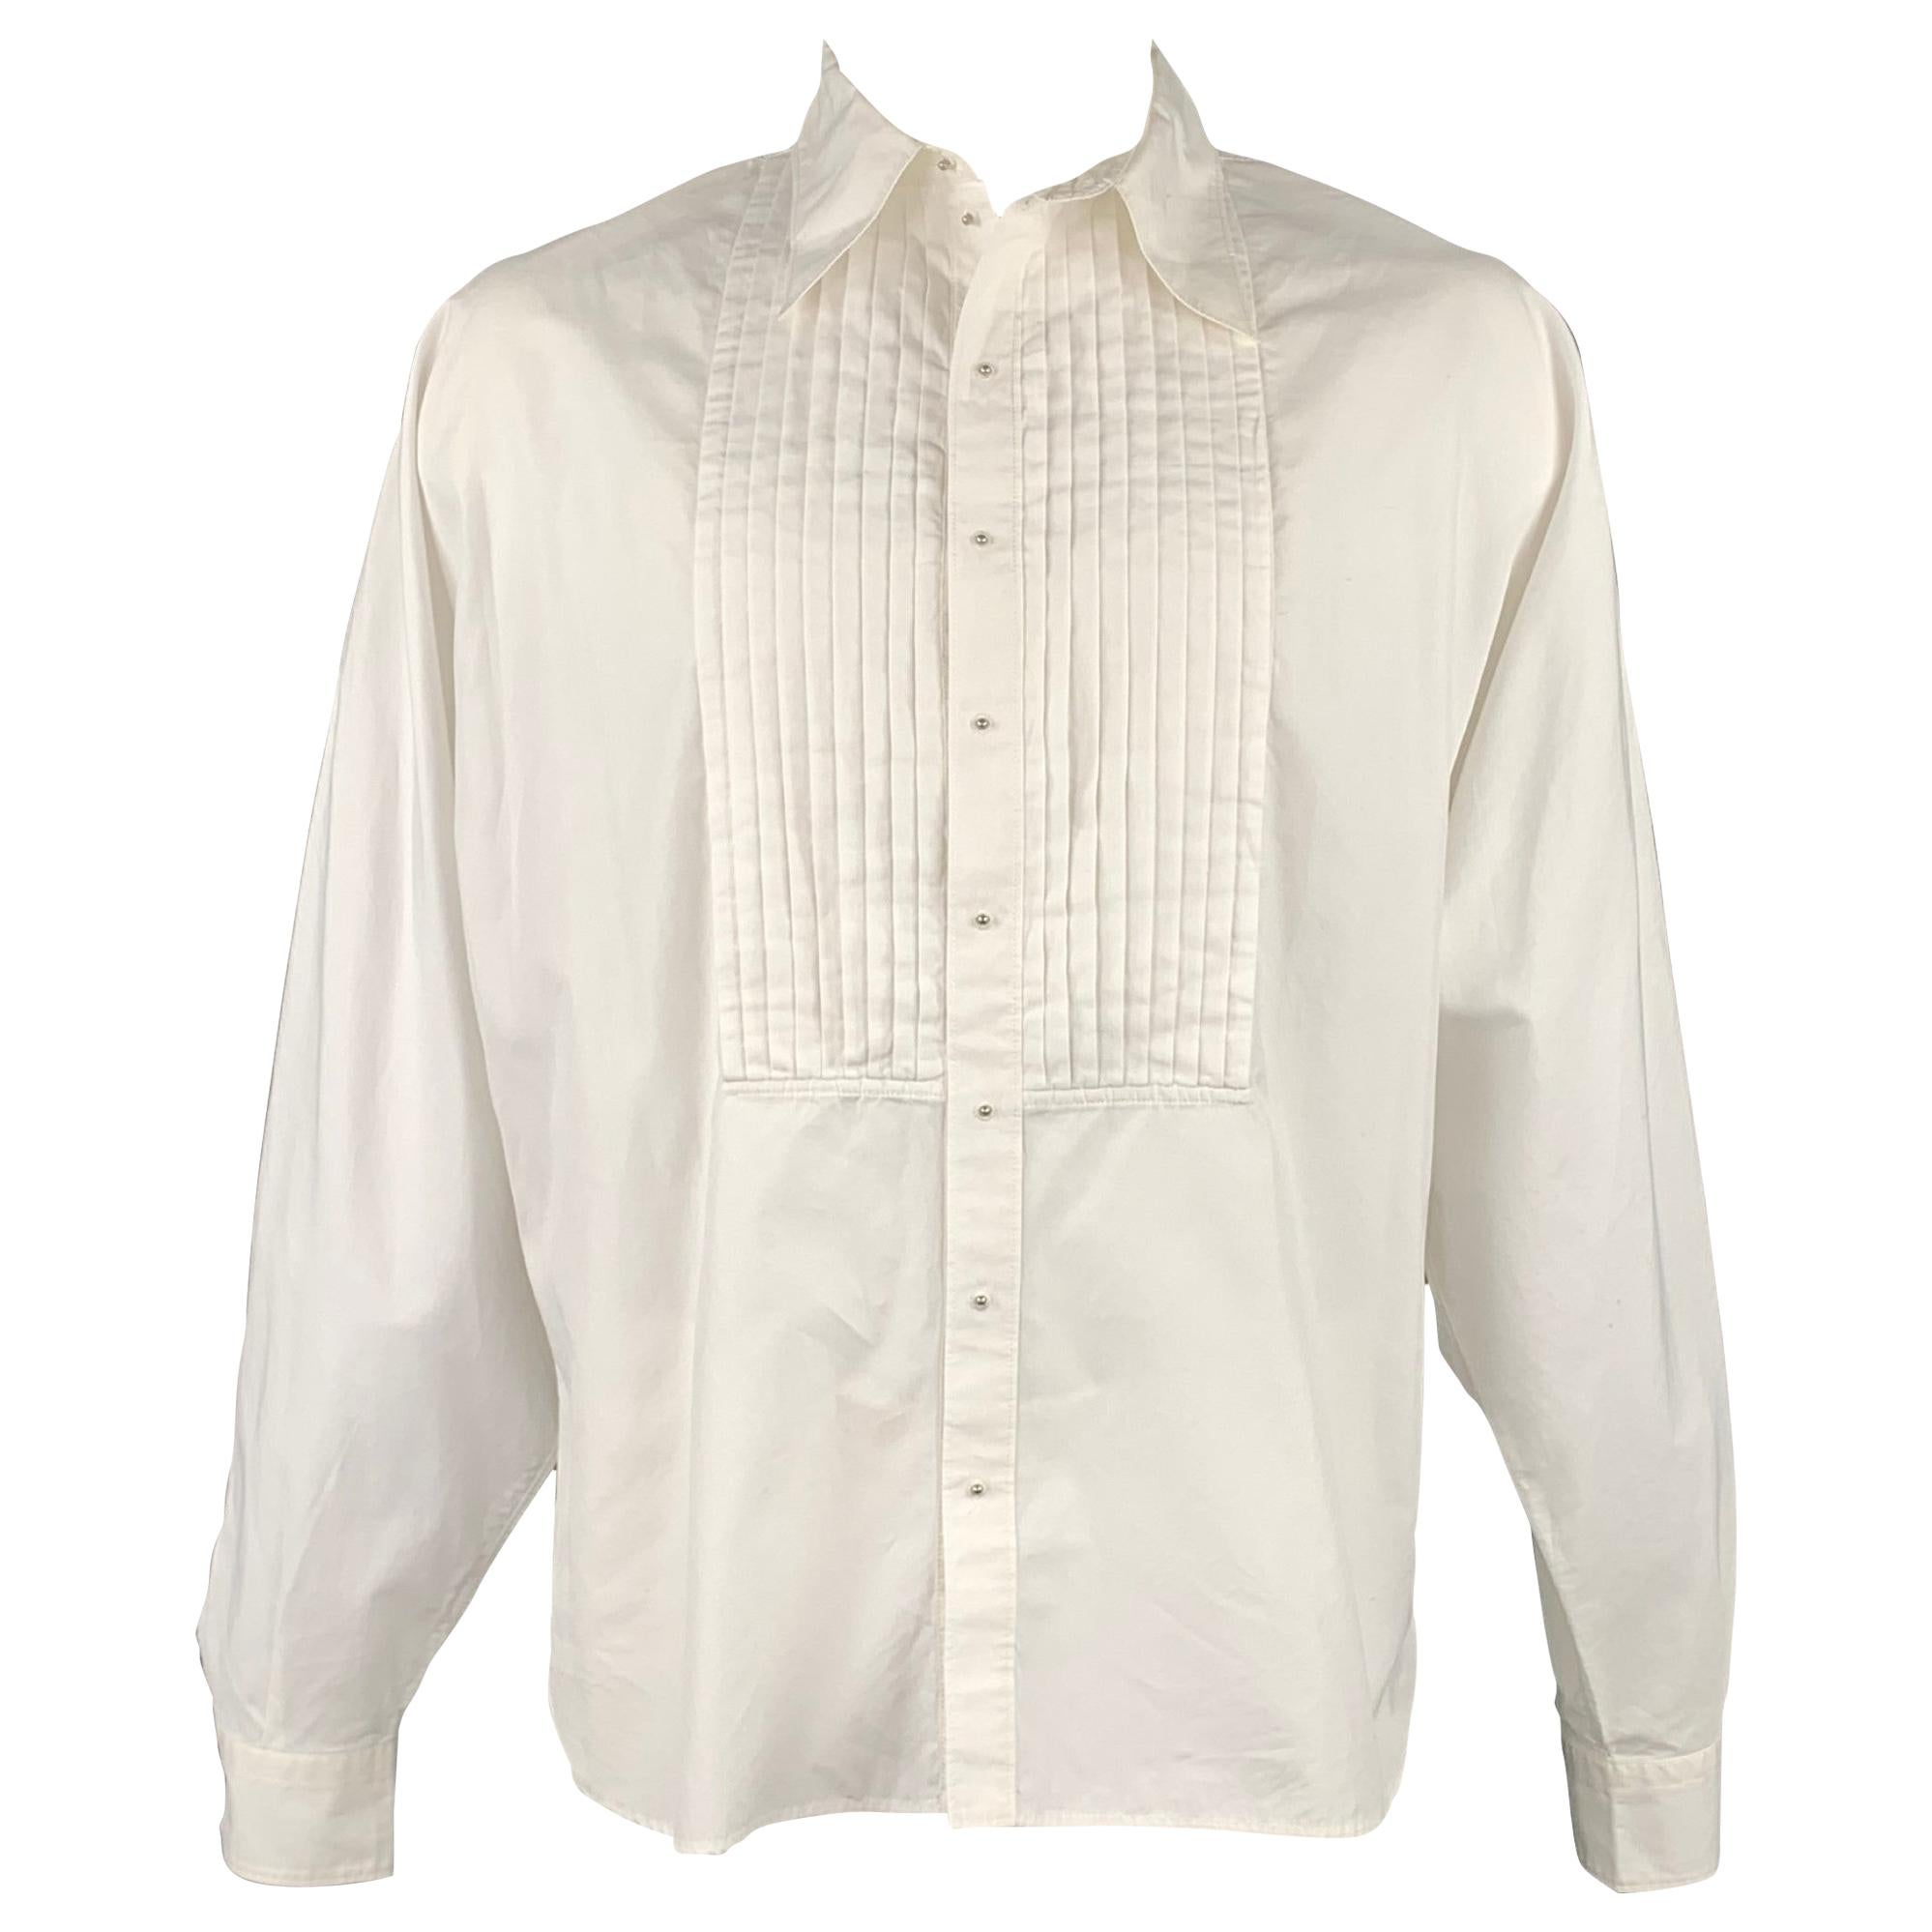 Vintage JEAN PAUL GAULTIER Size XL White Cotton Wing Sleeve Pleated Shirt